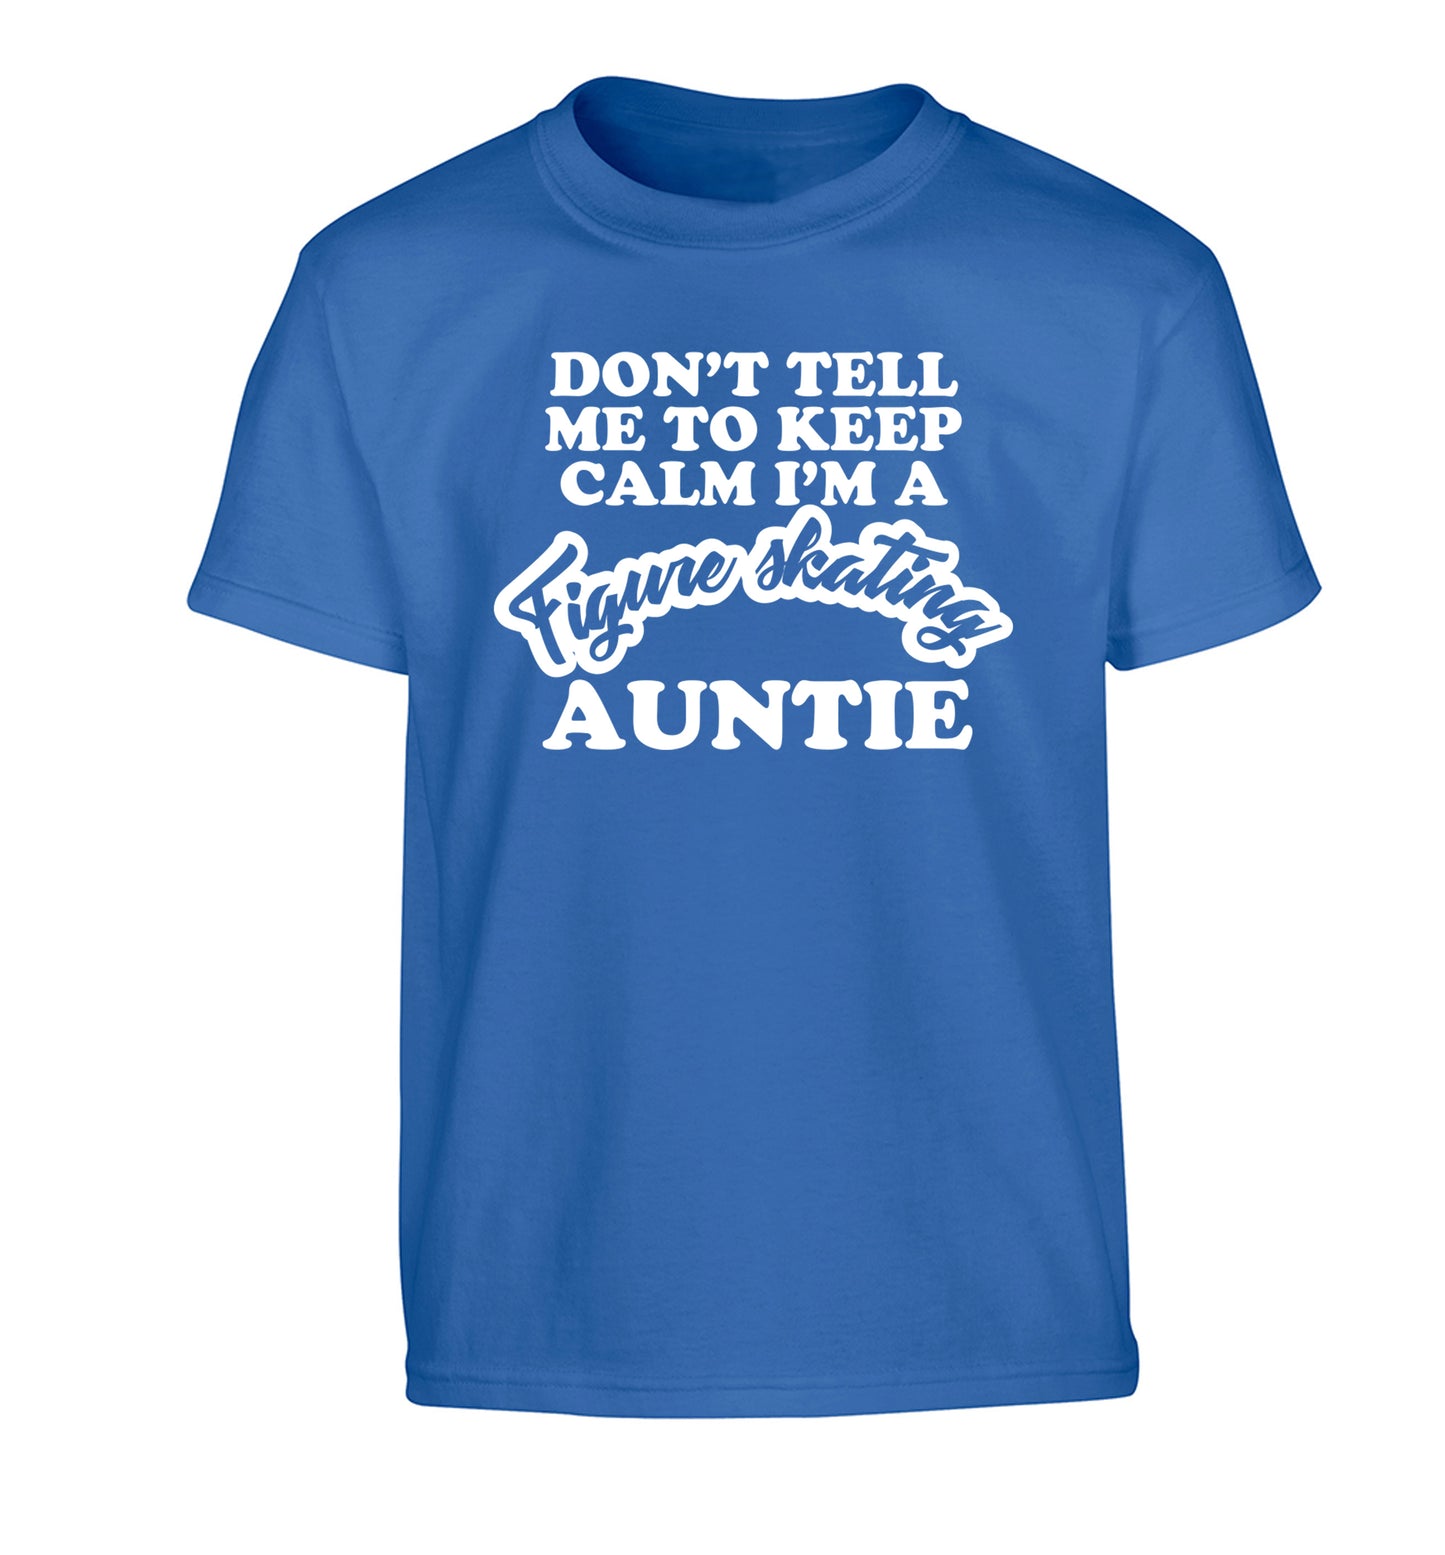 Don't tell me to keep calm I'm a figure skating auntie Children's blue Tshirt 12-14 Years